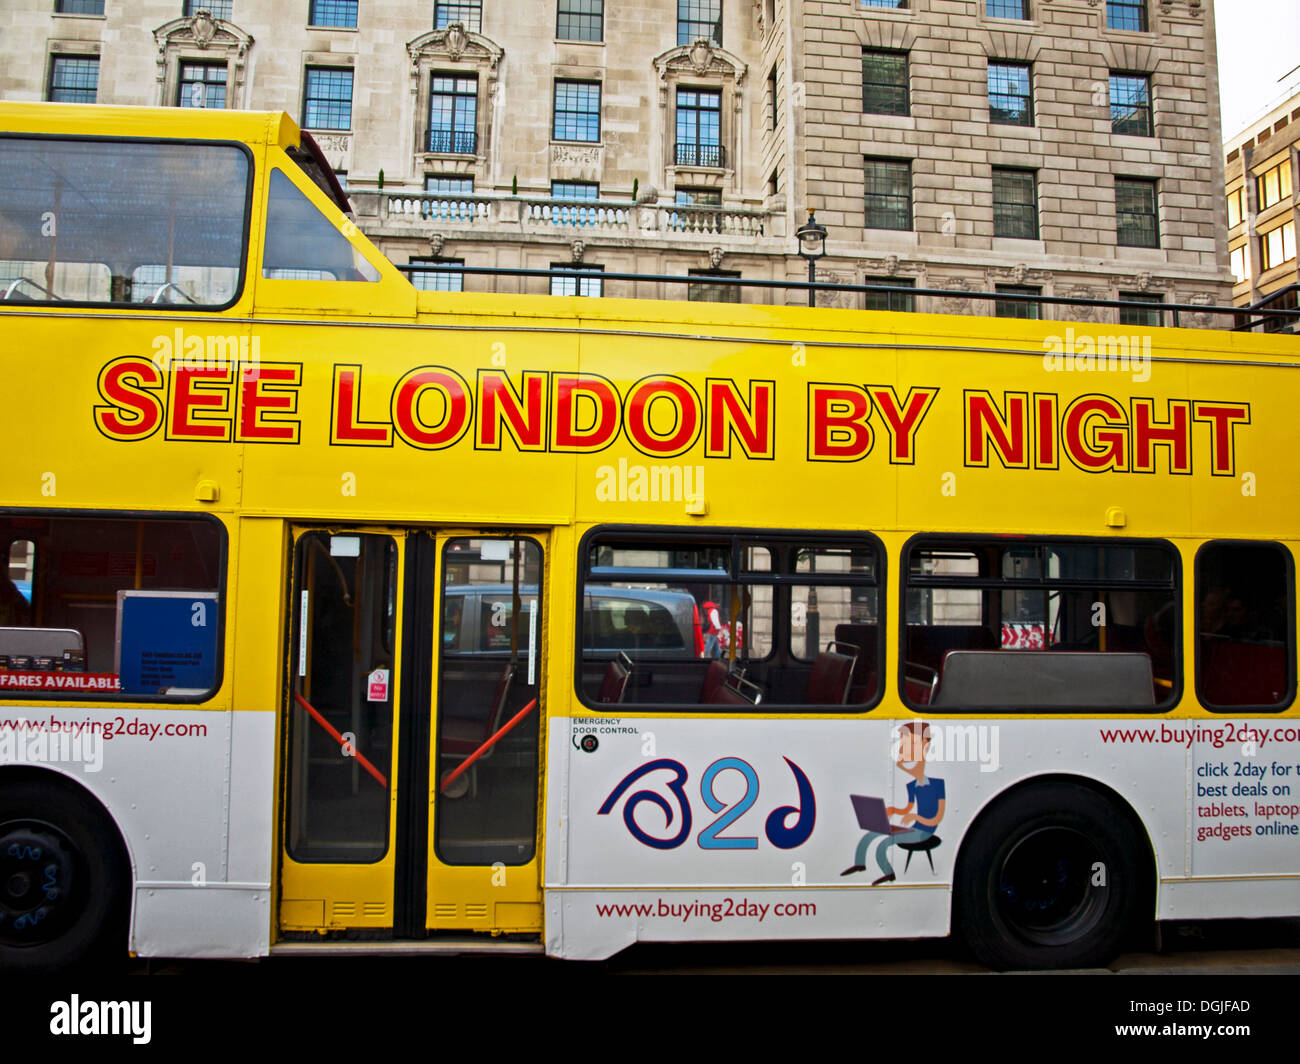 See London By Night tour bus on Piccadilly, West End, London, England, United Kingdom Stock Photo